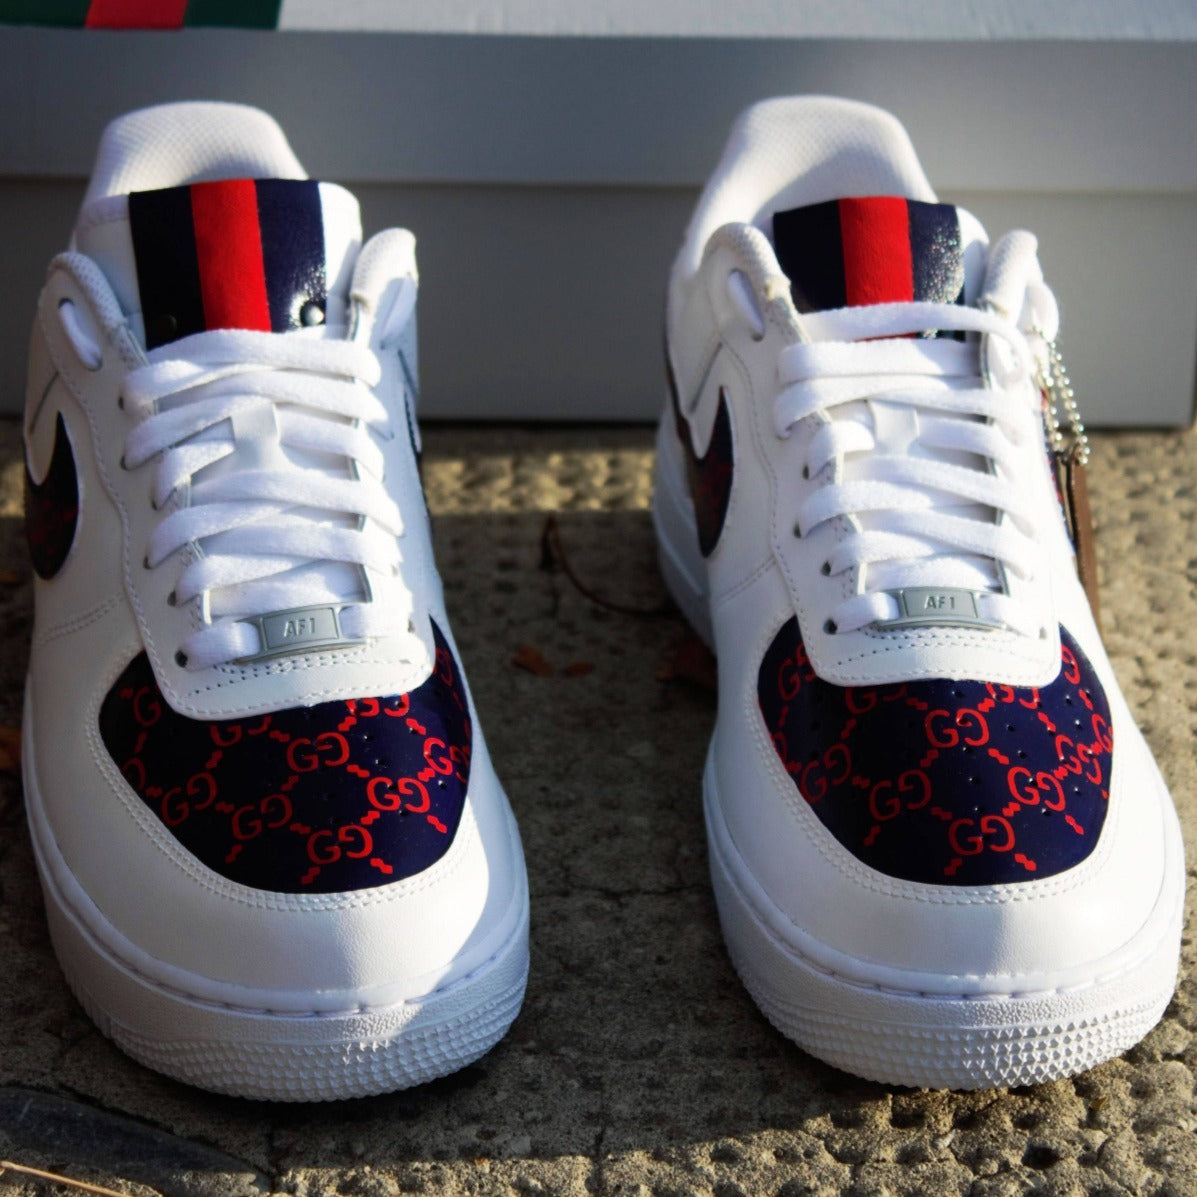 'Blue/Red GG' Air Force 1